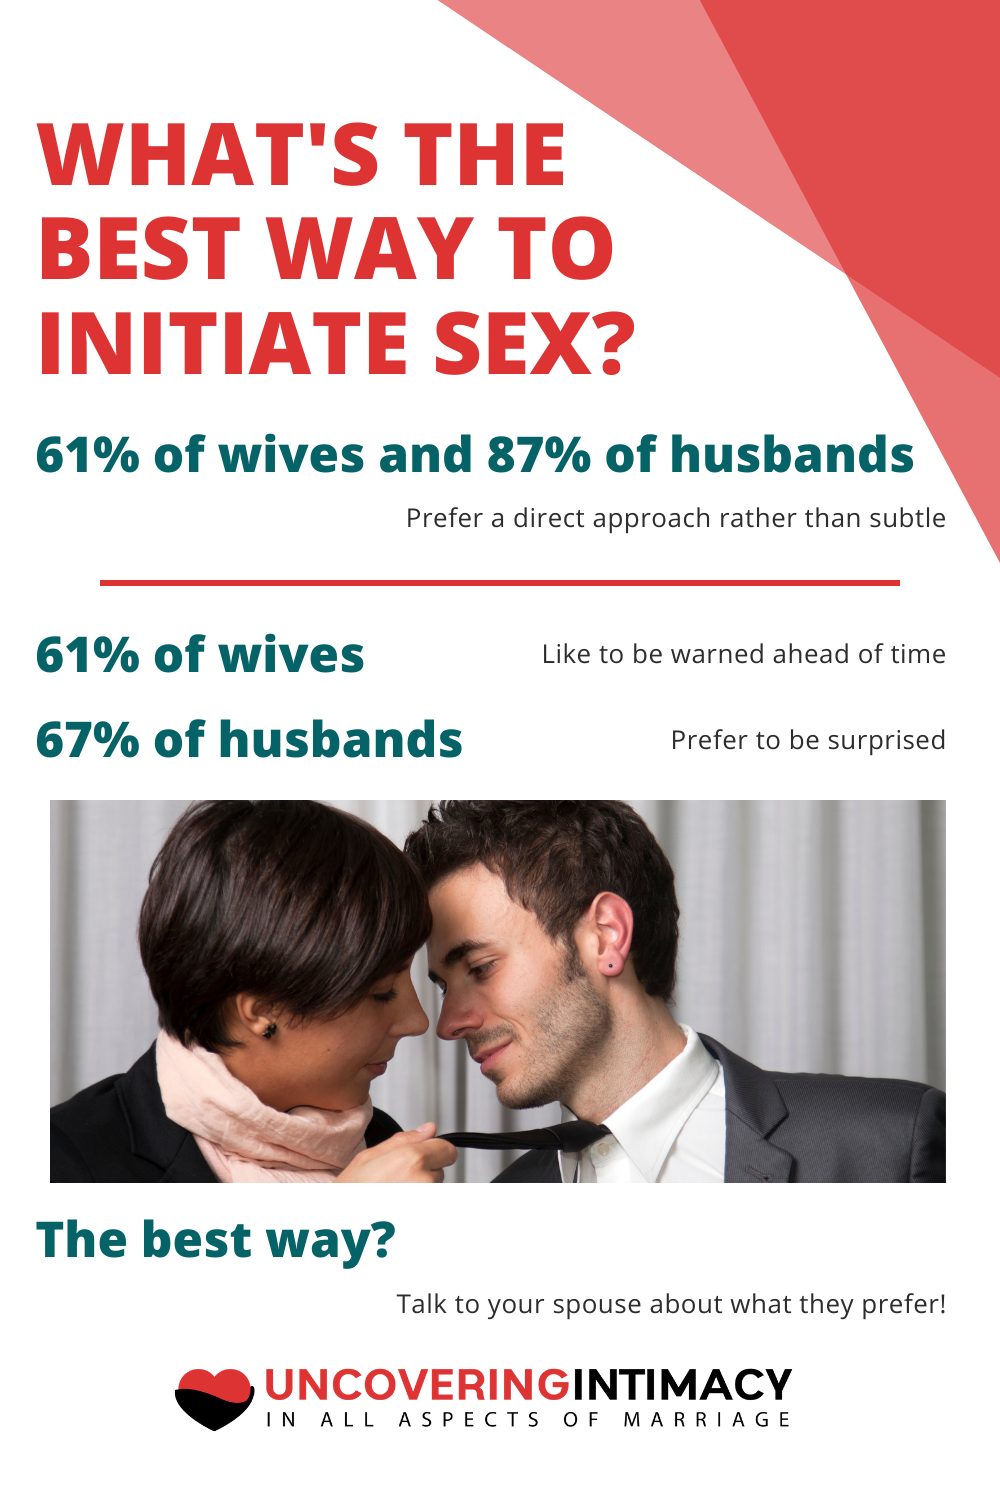 married women who initate sex